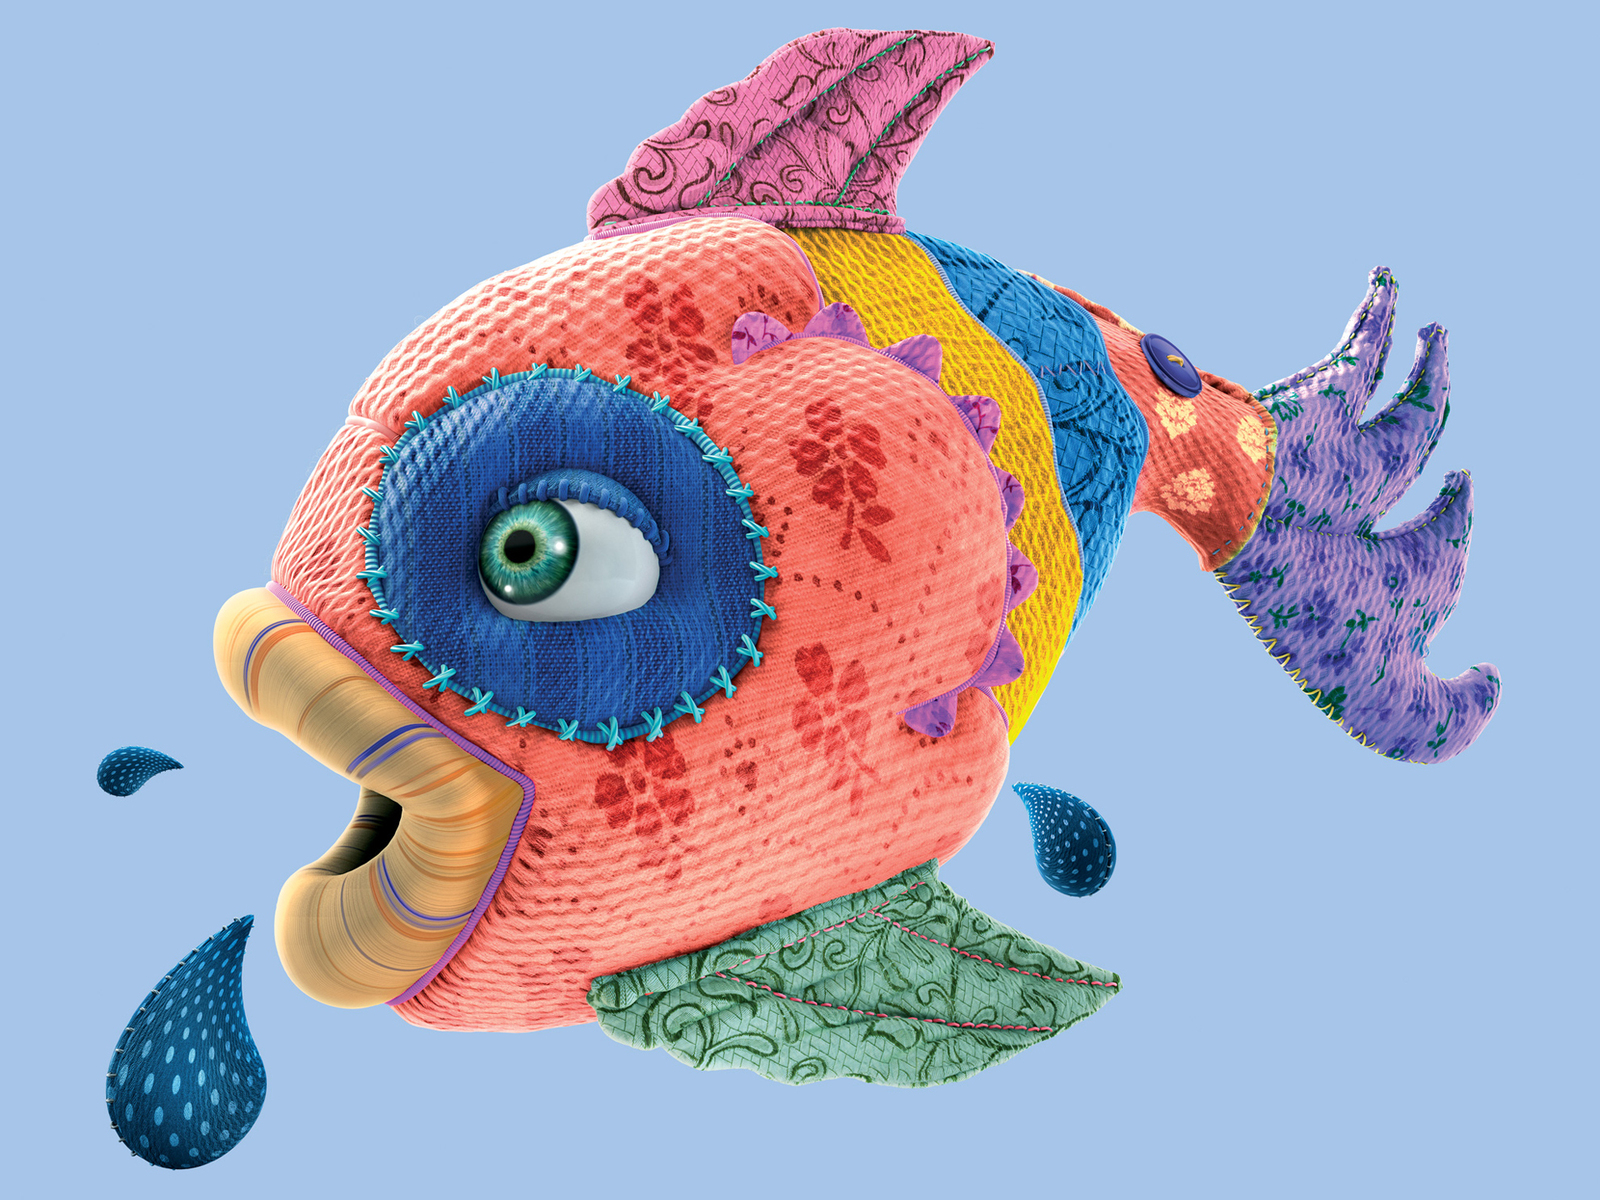 fish wallpaper hd 3d,stuffed toy,organism,snout,toy,textile